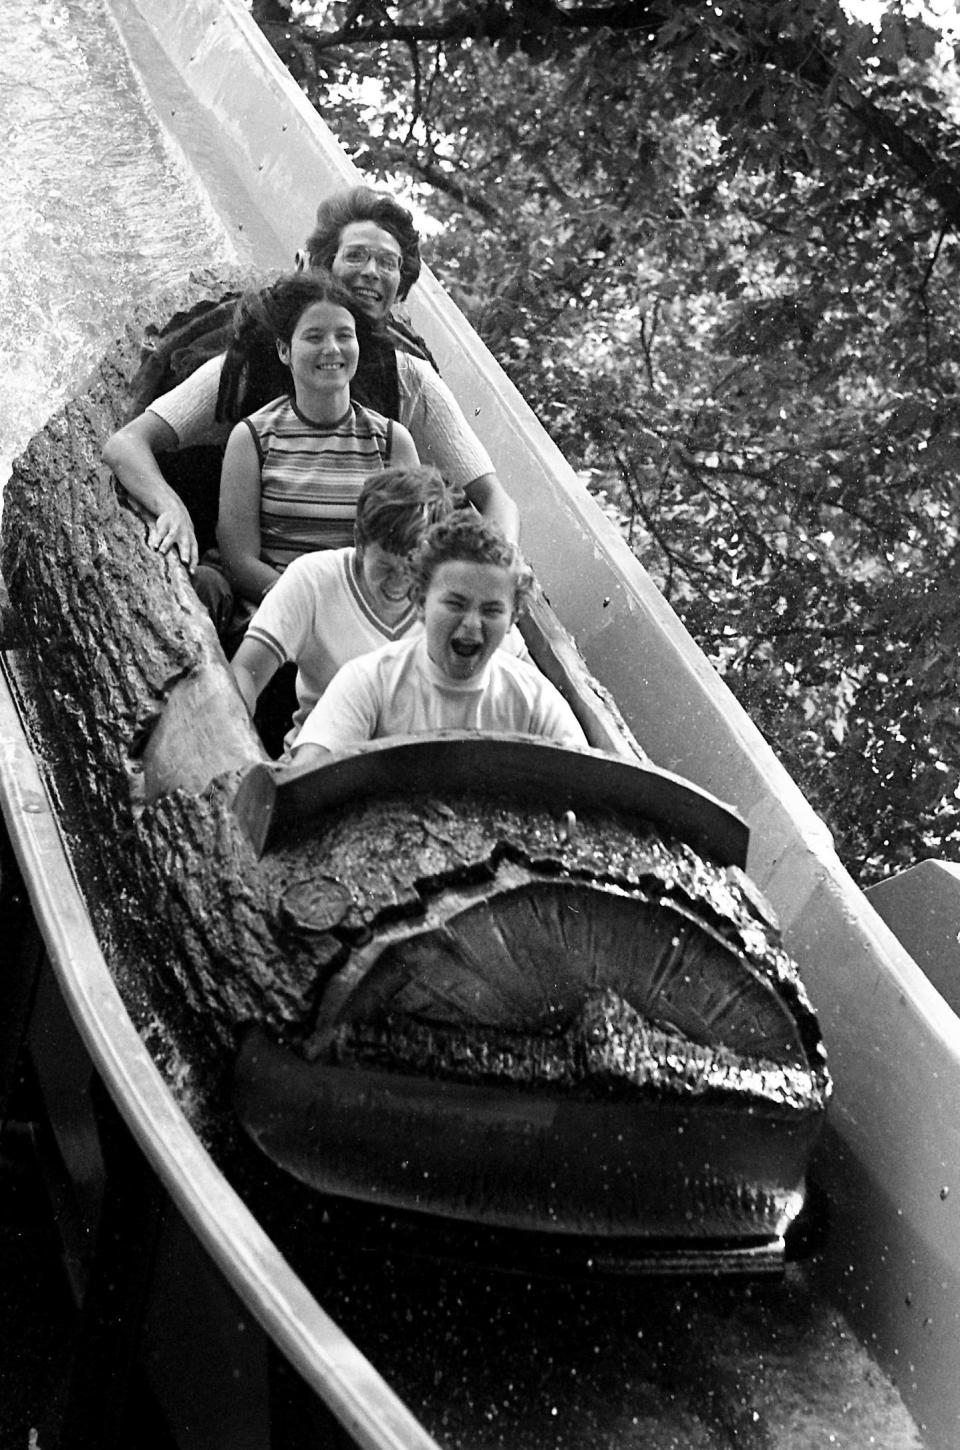 The Zoom-Flume ride means fun to this family visiting Opryland U.S.A. as the $28 million entertainment park officially opened it doors to the public May 27, 1972. The ride, consisting of hollowed-out logs conveyed in a trough of water, appeared to be the park’s most popular.